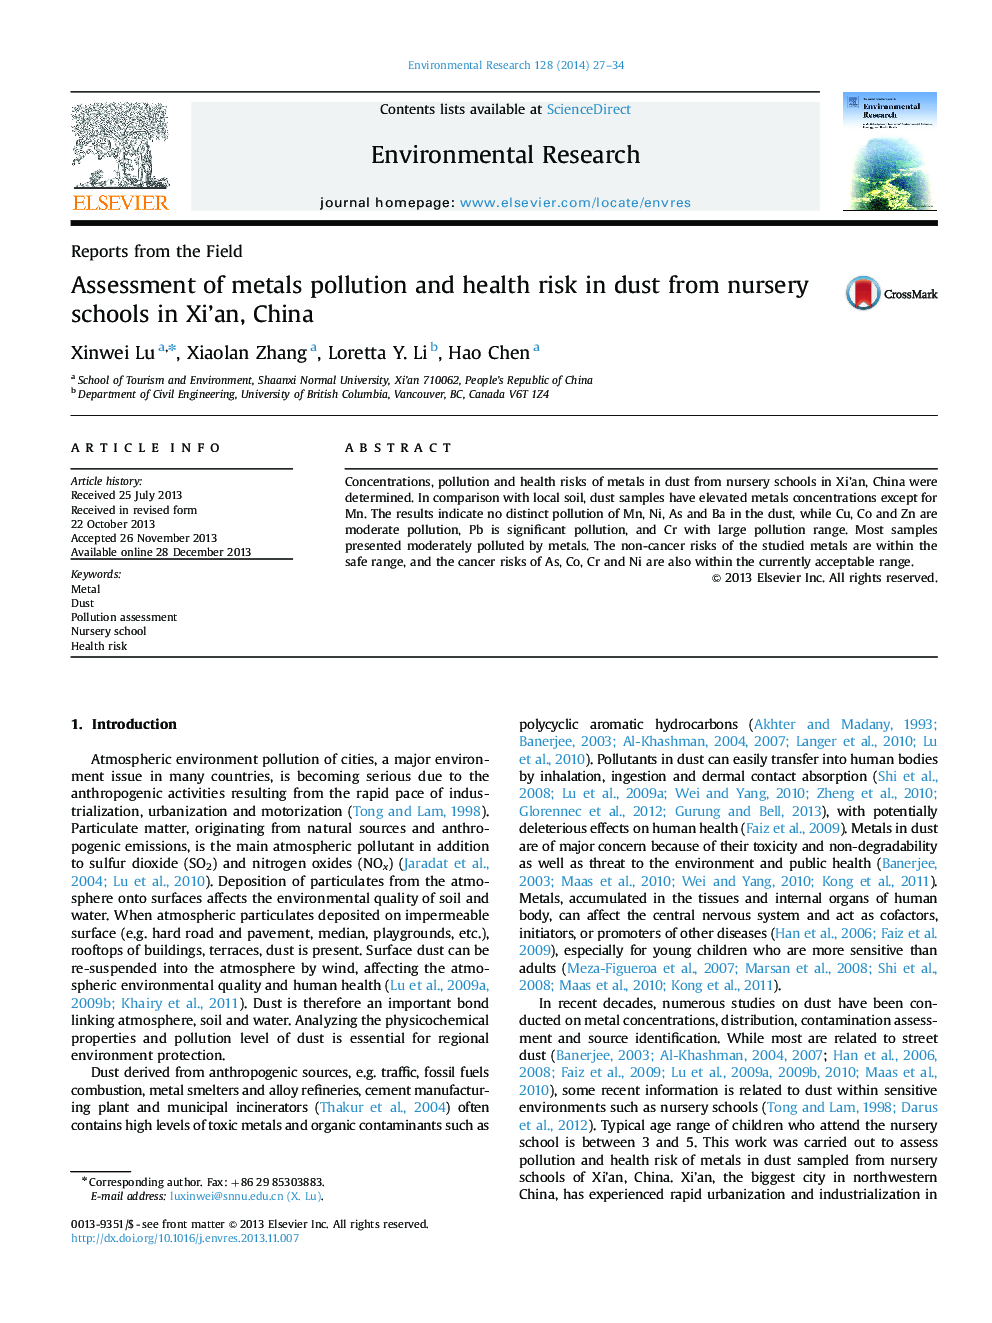 Assessment of metals pollution and health risk in dust from nursery schools in Xi’an, China